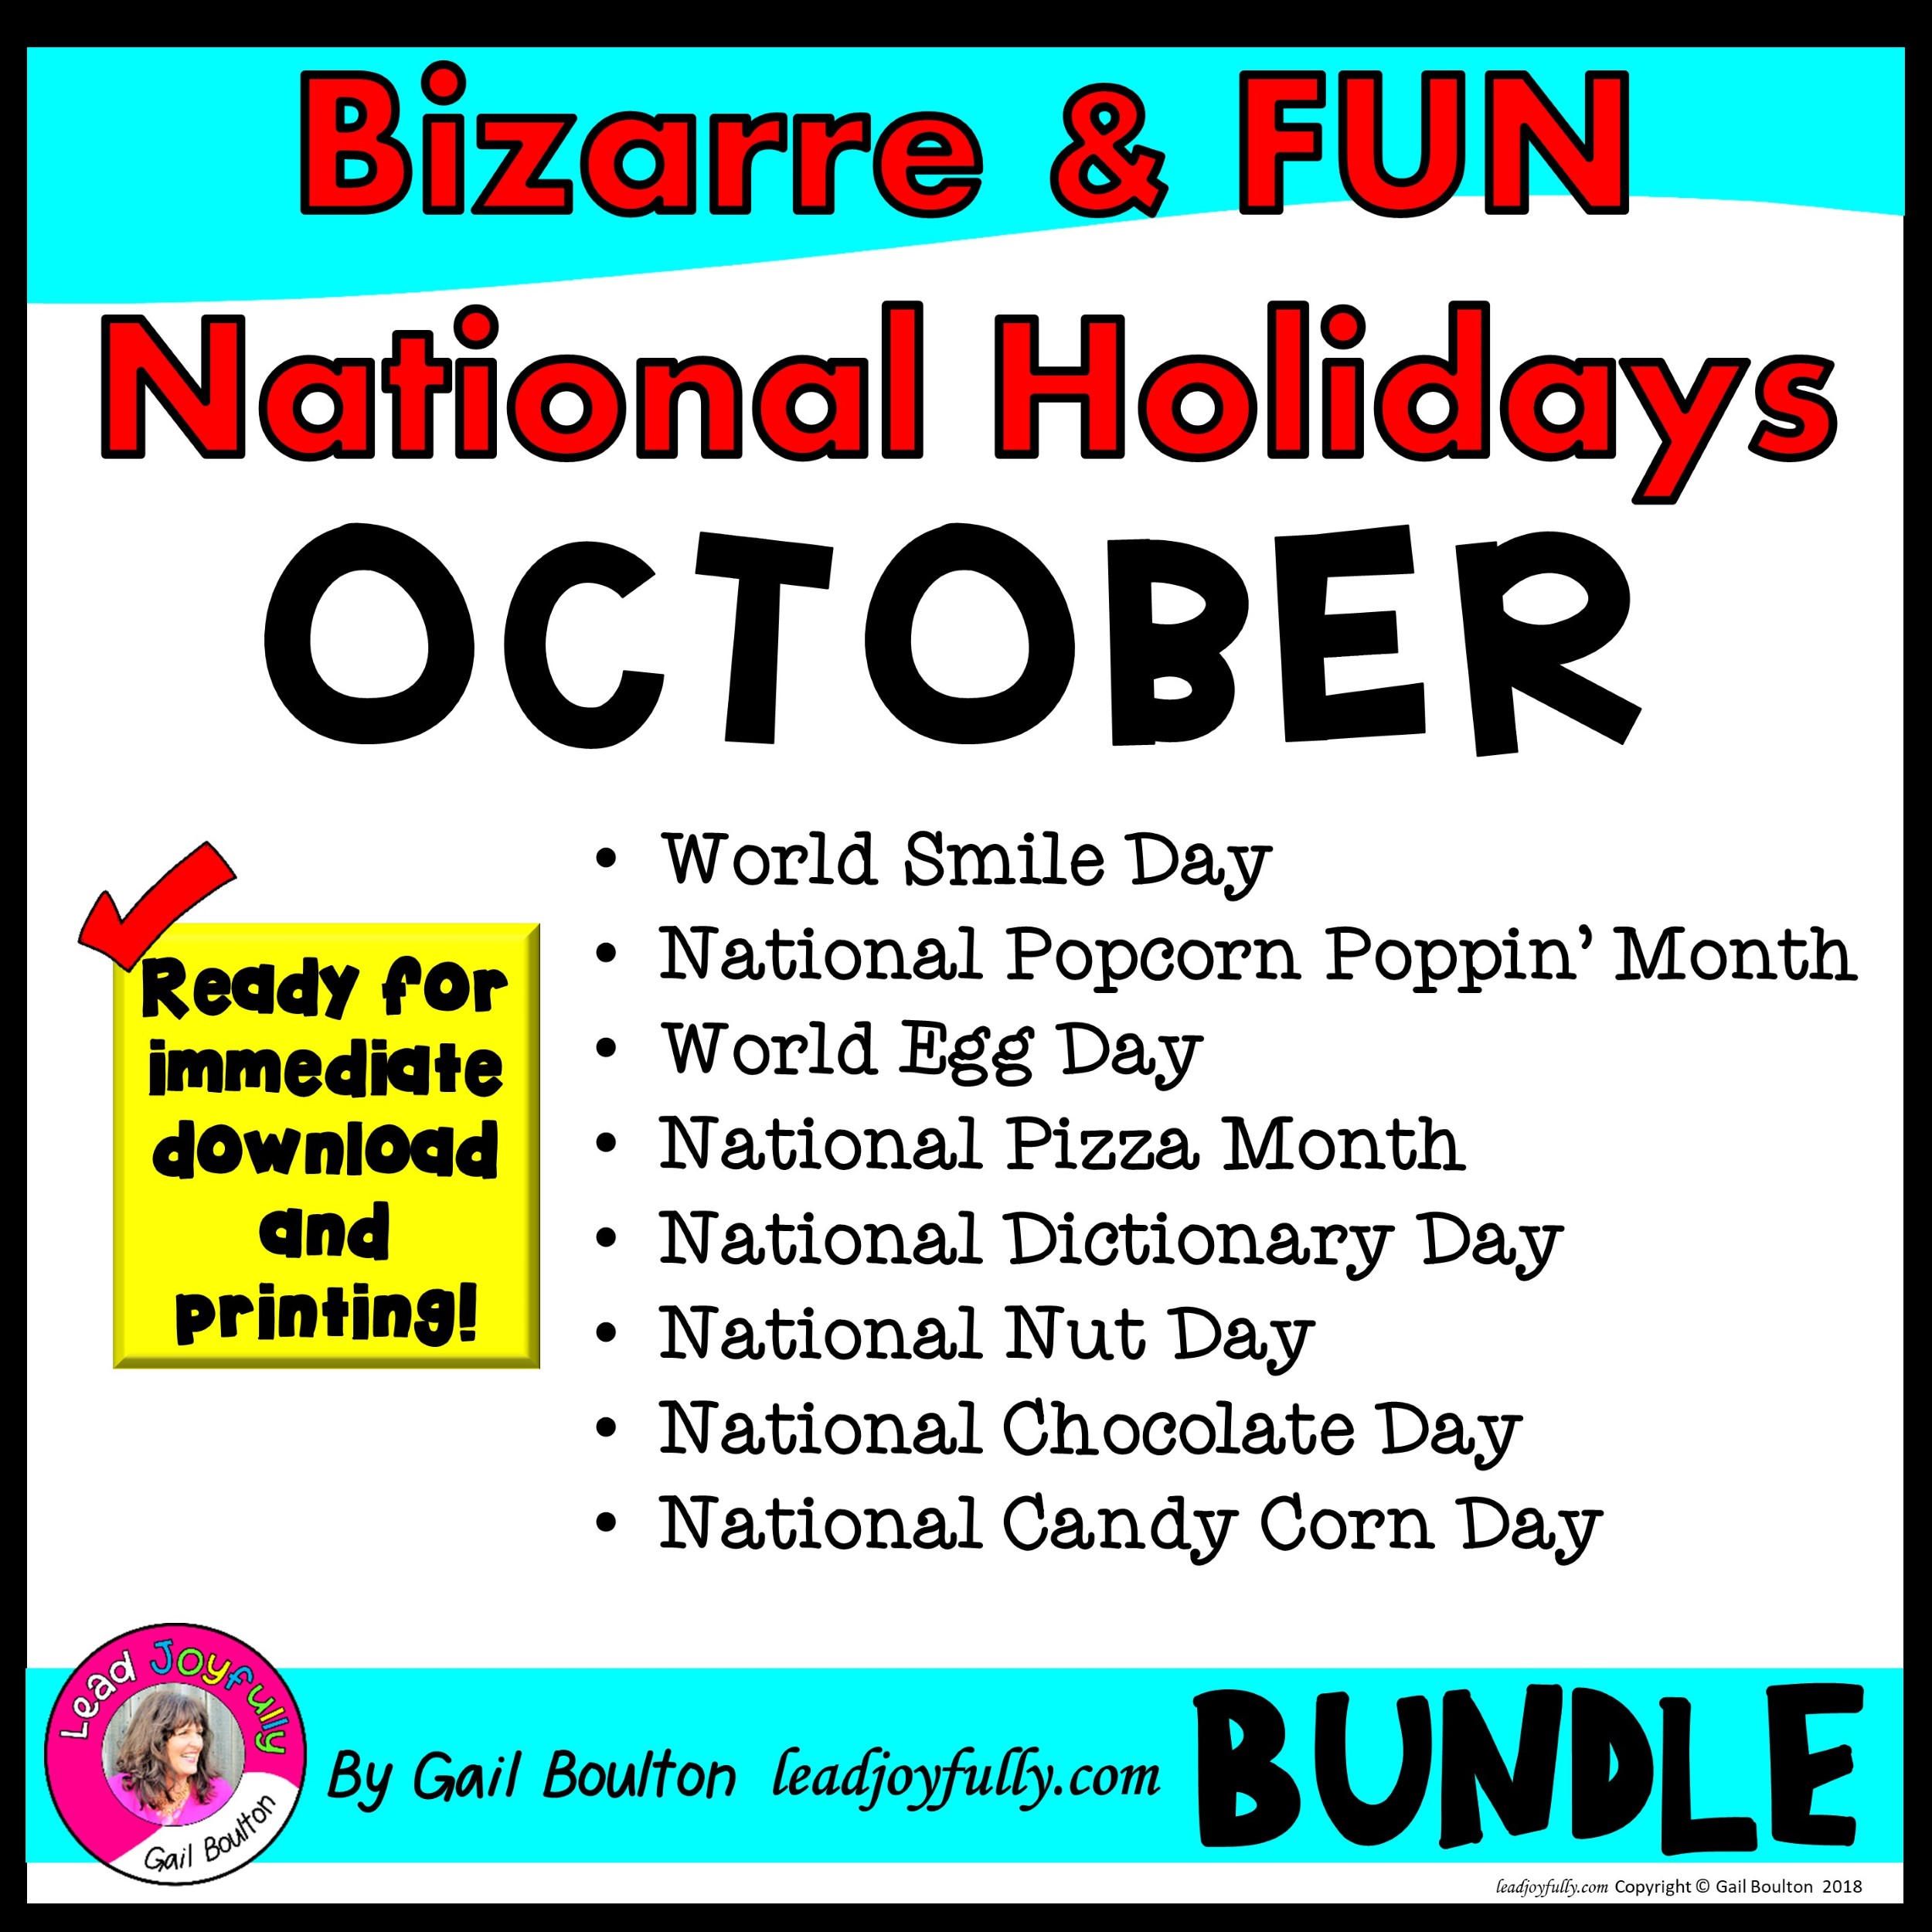 bizarre-and-fun-national-holidays-to-celebrate-your-staff-october